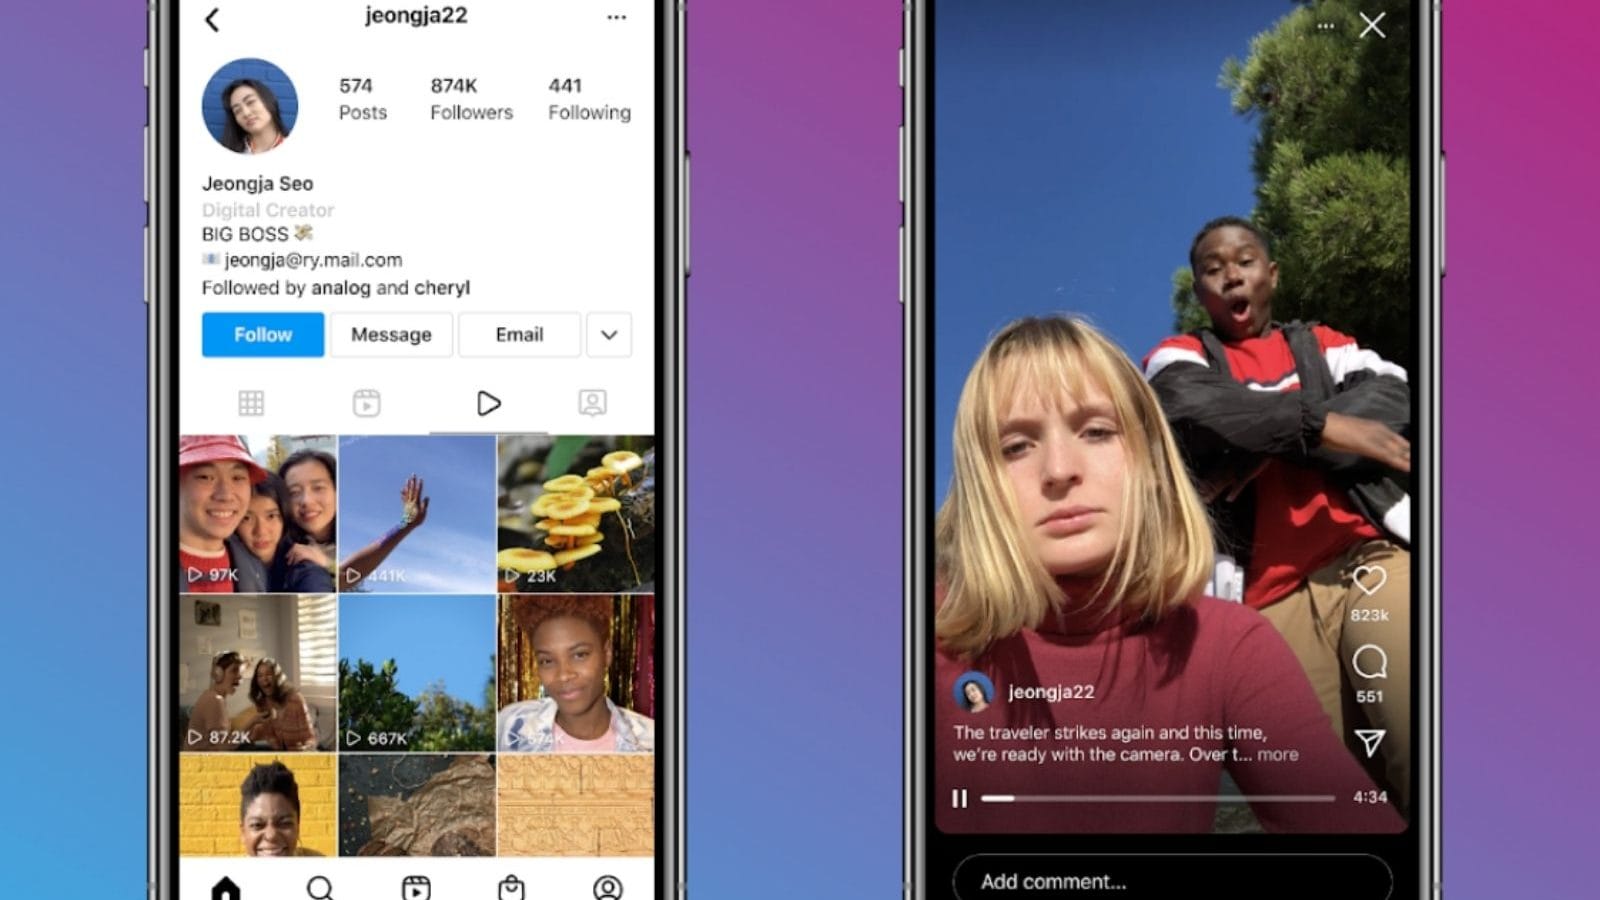 Instagram Unifies Feed Videos and IGTV, New Editing Tools Like Trimming Incoming